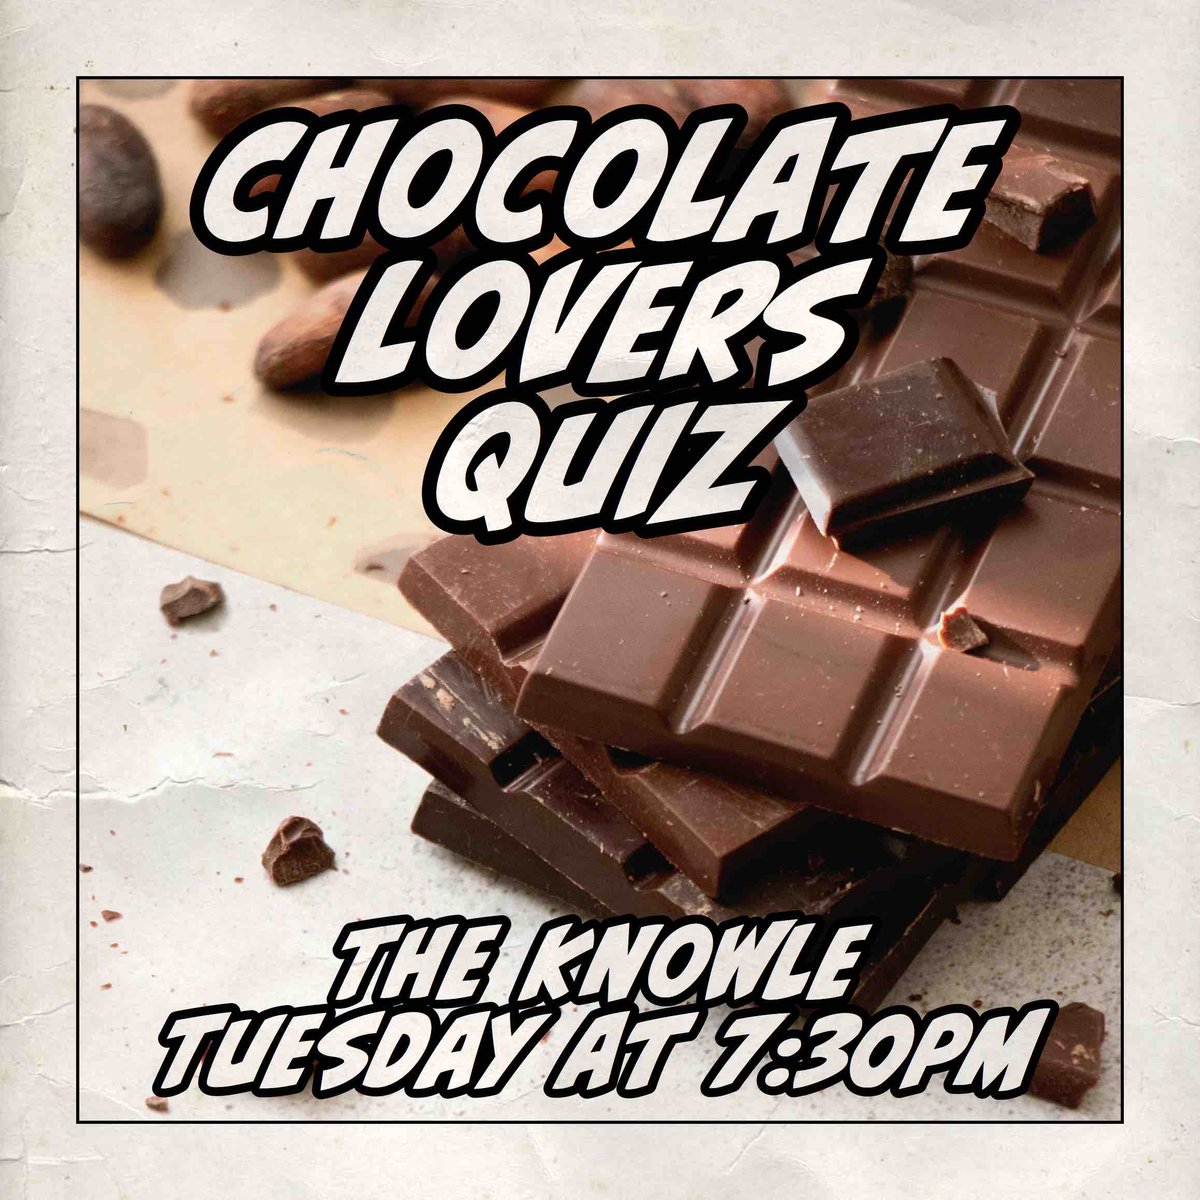 Join us on Tuesday at #TheKnowle in #BS4, #Knowle, #Bristol for our next #QuizNight! 7:30pm start for our #Chocolate Lovers #Quiz with bar tabs and wine to be won